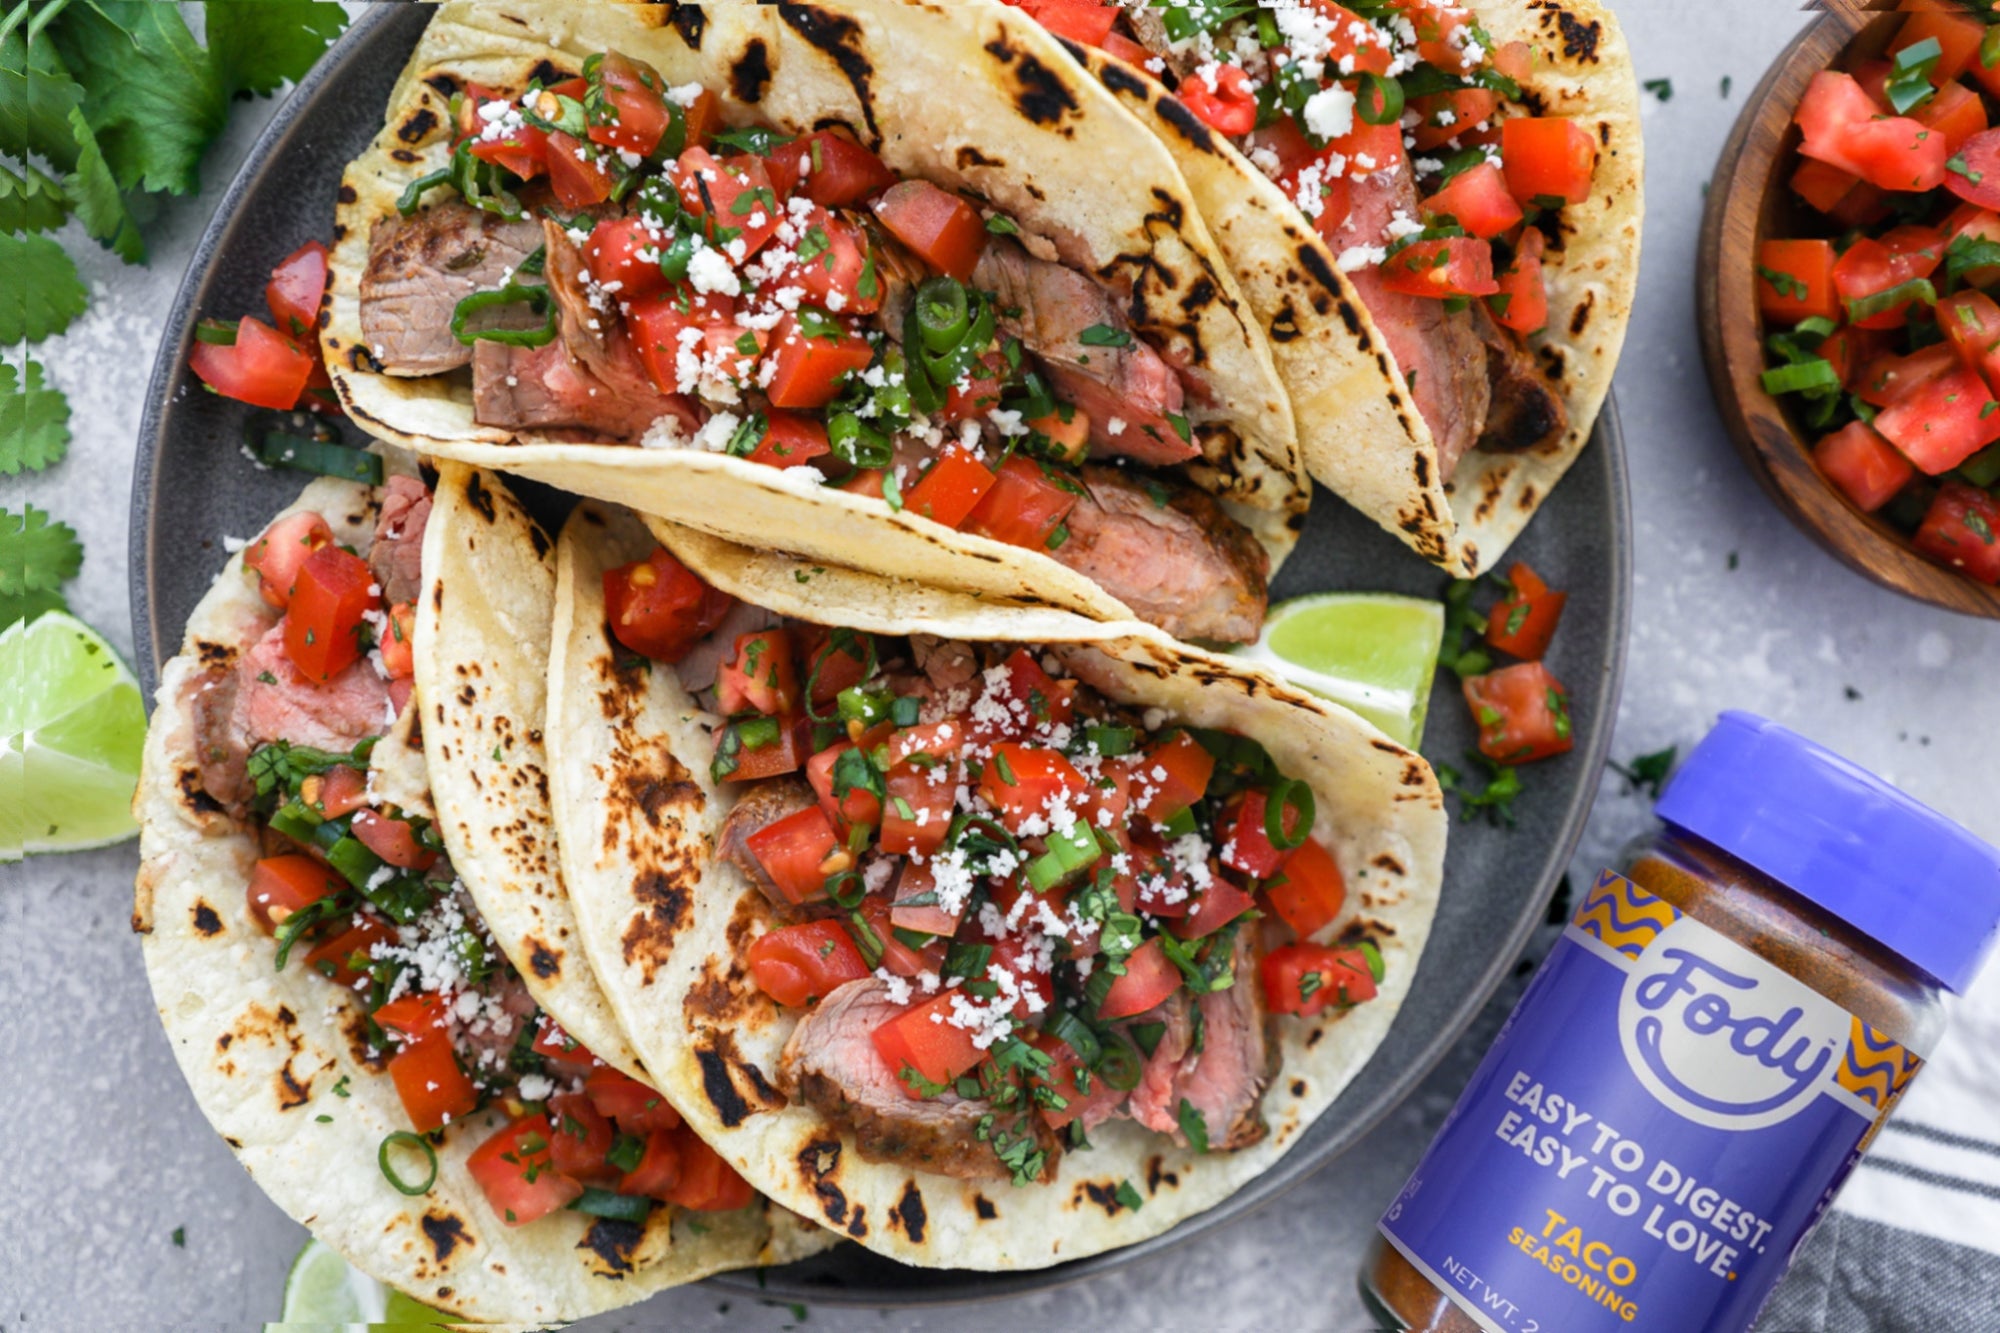 An image of Fody's grilled steak tacos with pico de gallo laid out on a plate beside a bottle of Fody's taco seasoning.